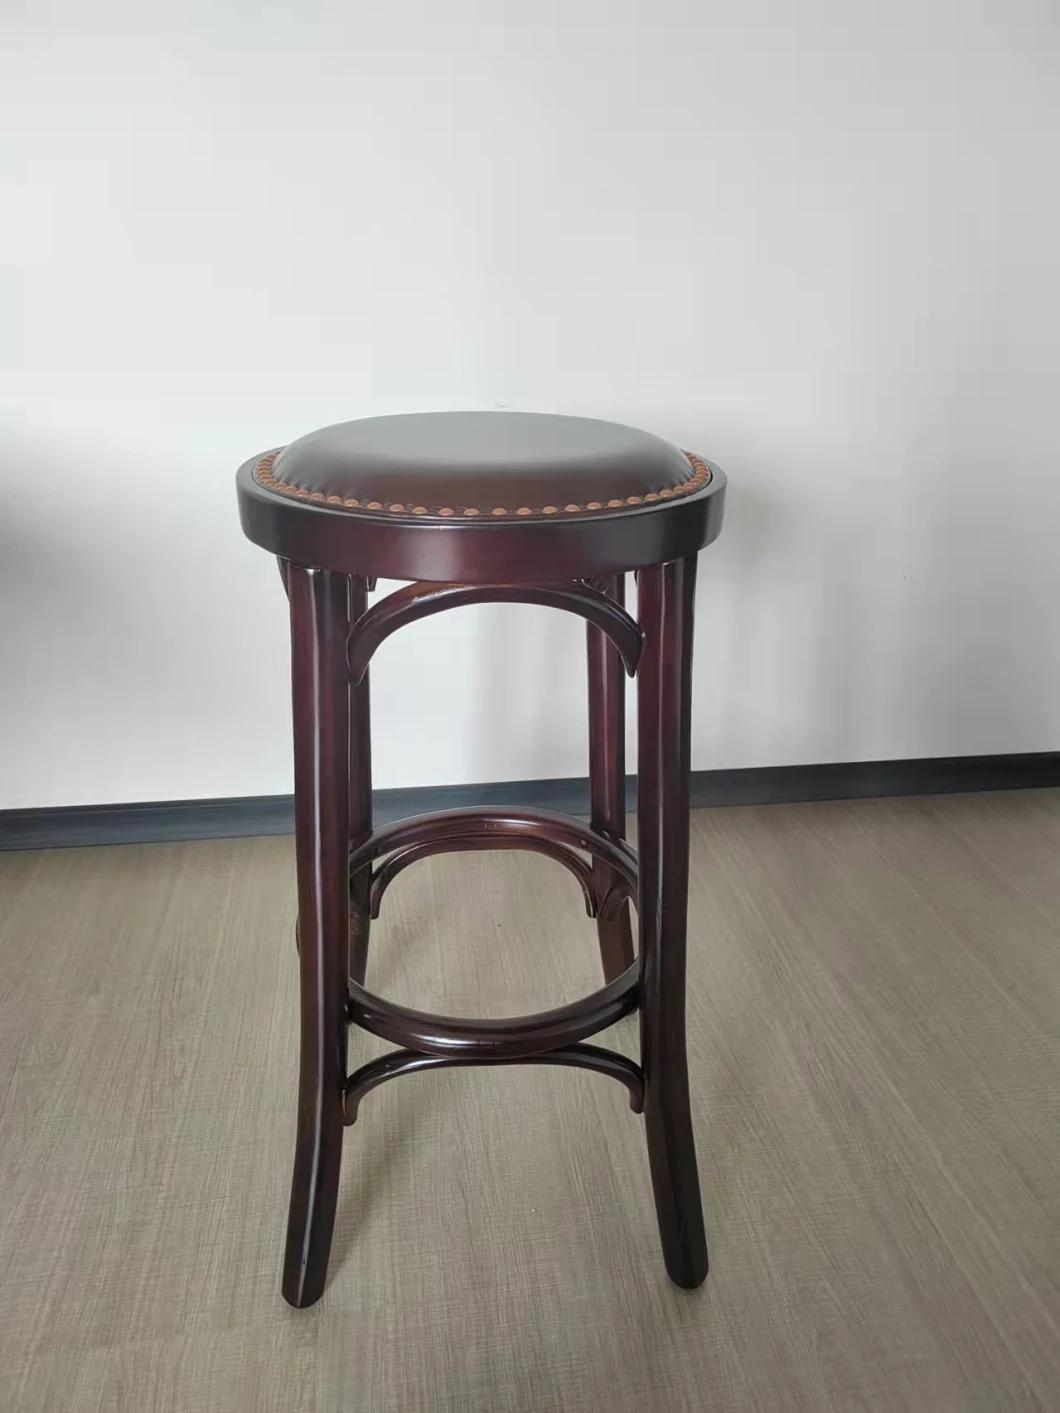 Restaurant Cafe Coffee Shop Bar Commercial Use Solid Frame High Counter PU Leather Seat Round Stool